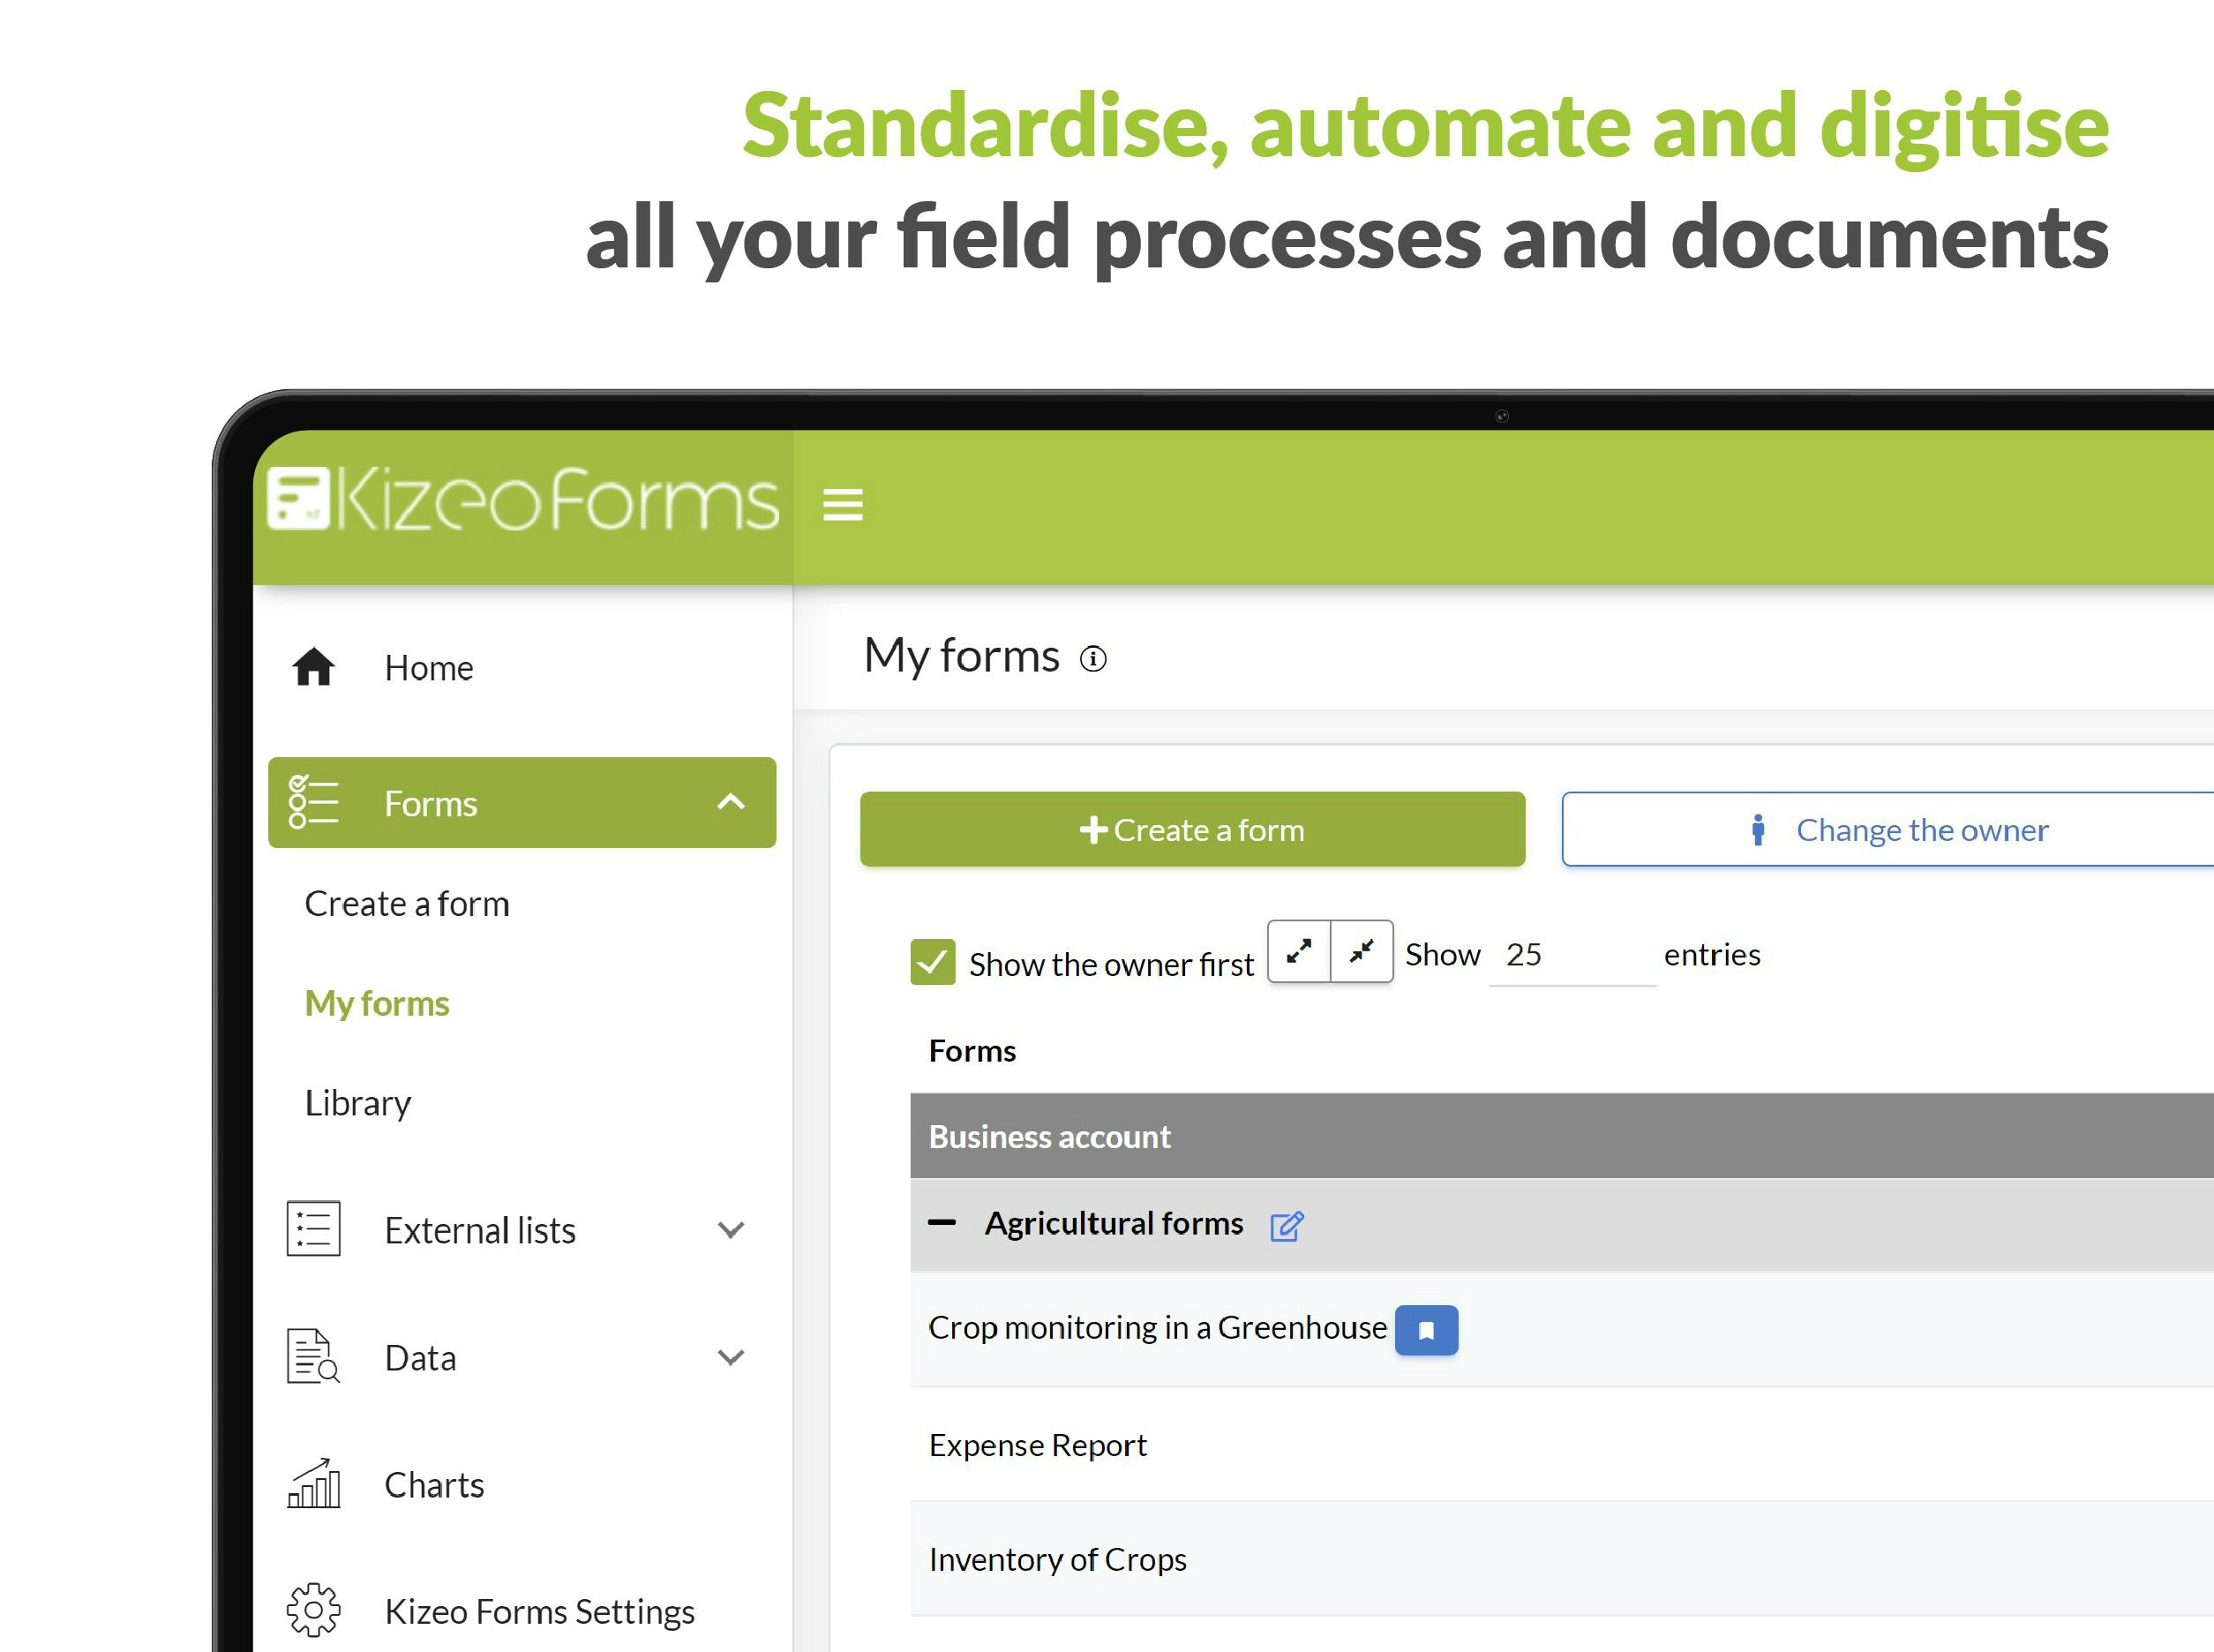 Kizeo Forms Software - Standardise and automate your processes